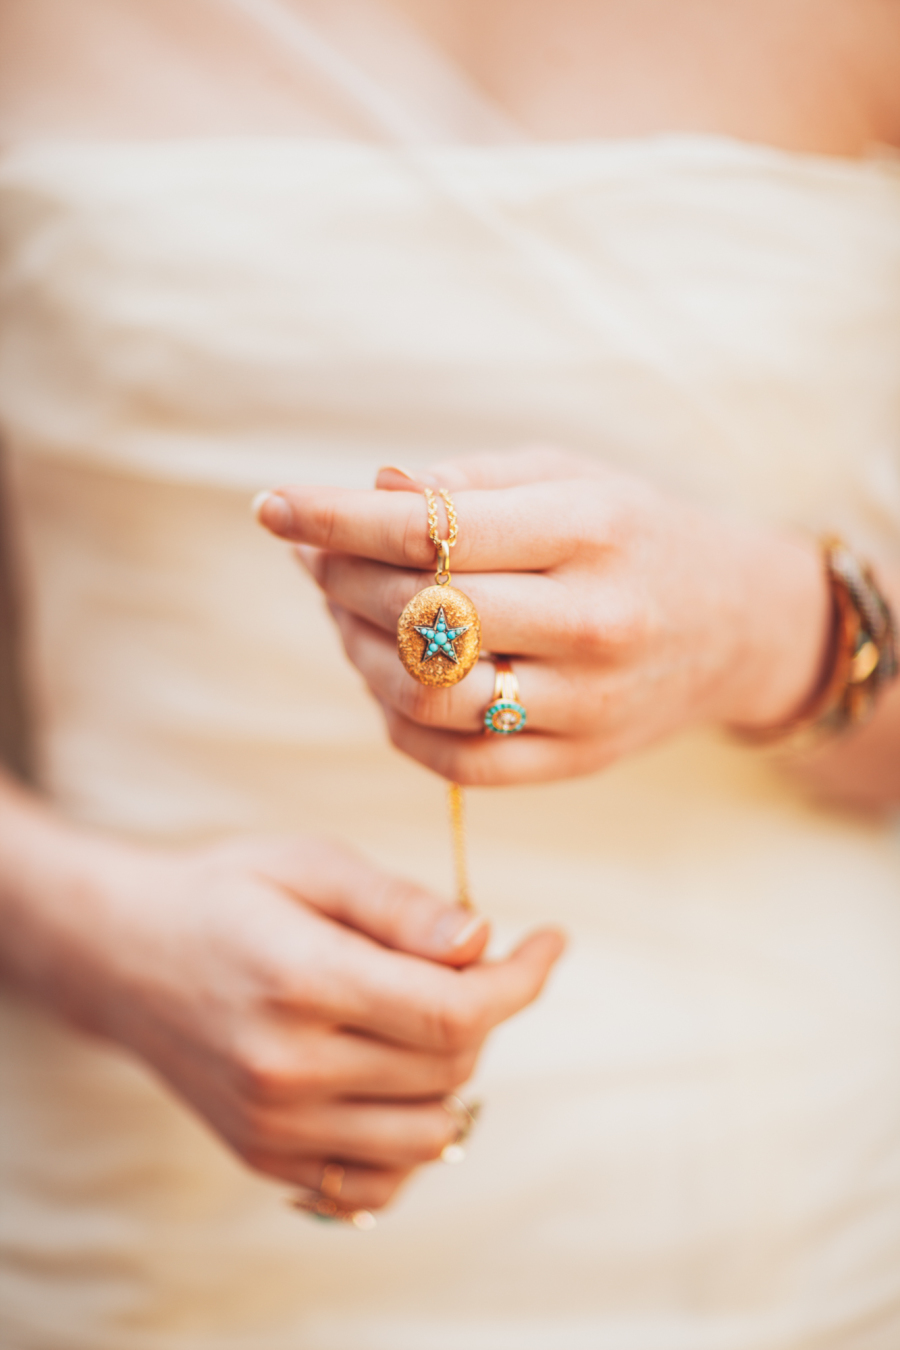 Bride holding turquoise necklace with star and ring.